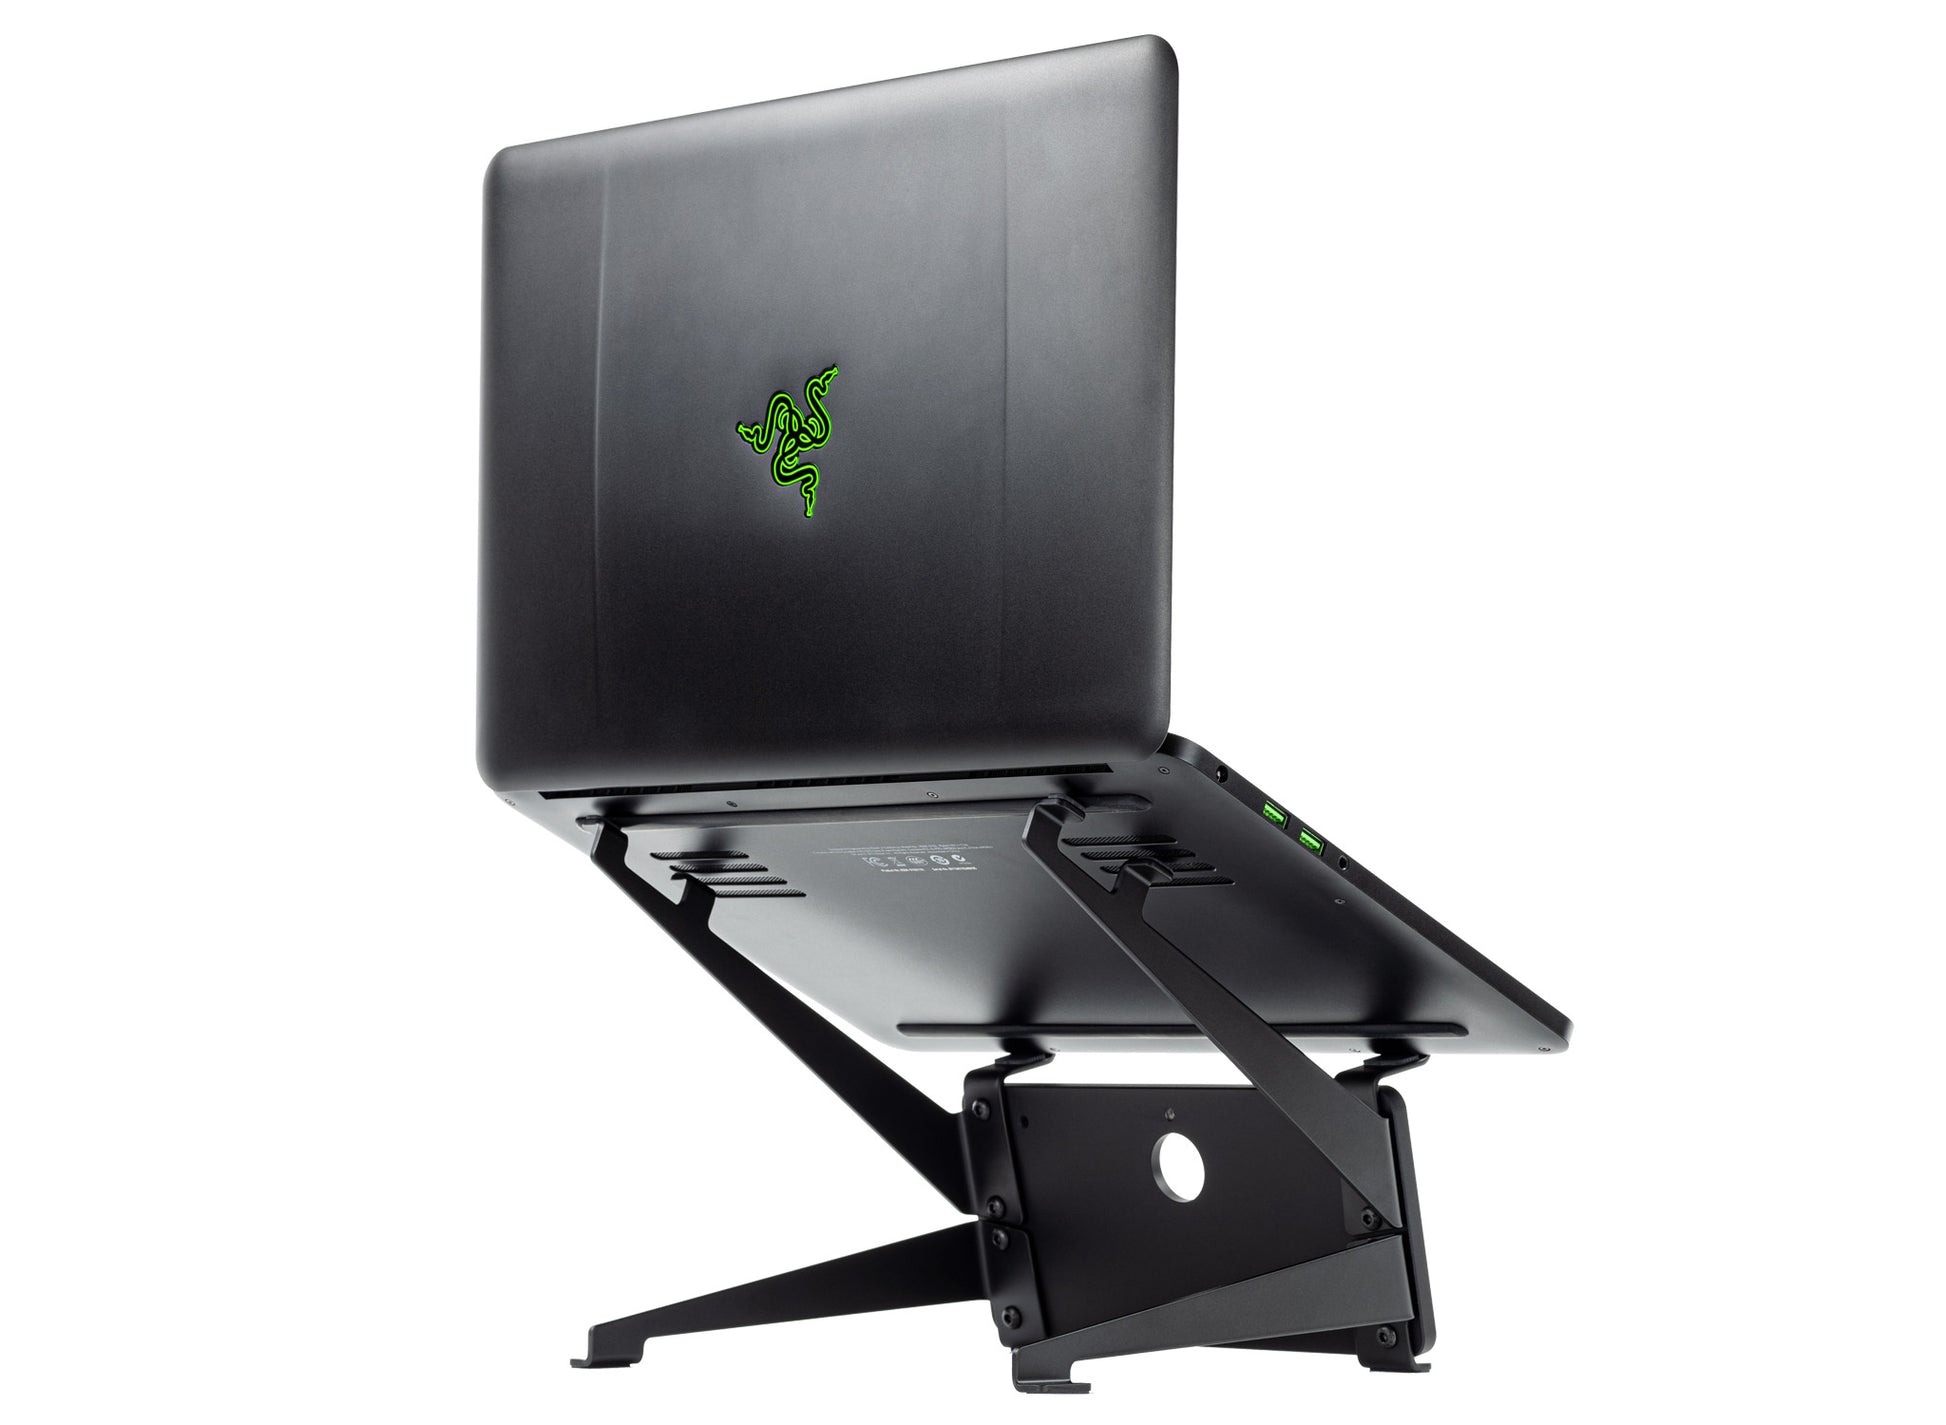 SVALT Cooling Stand model SRxN black back side view for silent passive cooling performance with PC gaming laptops